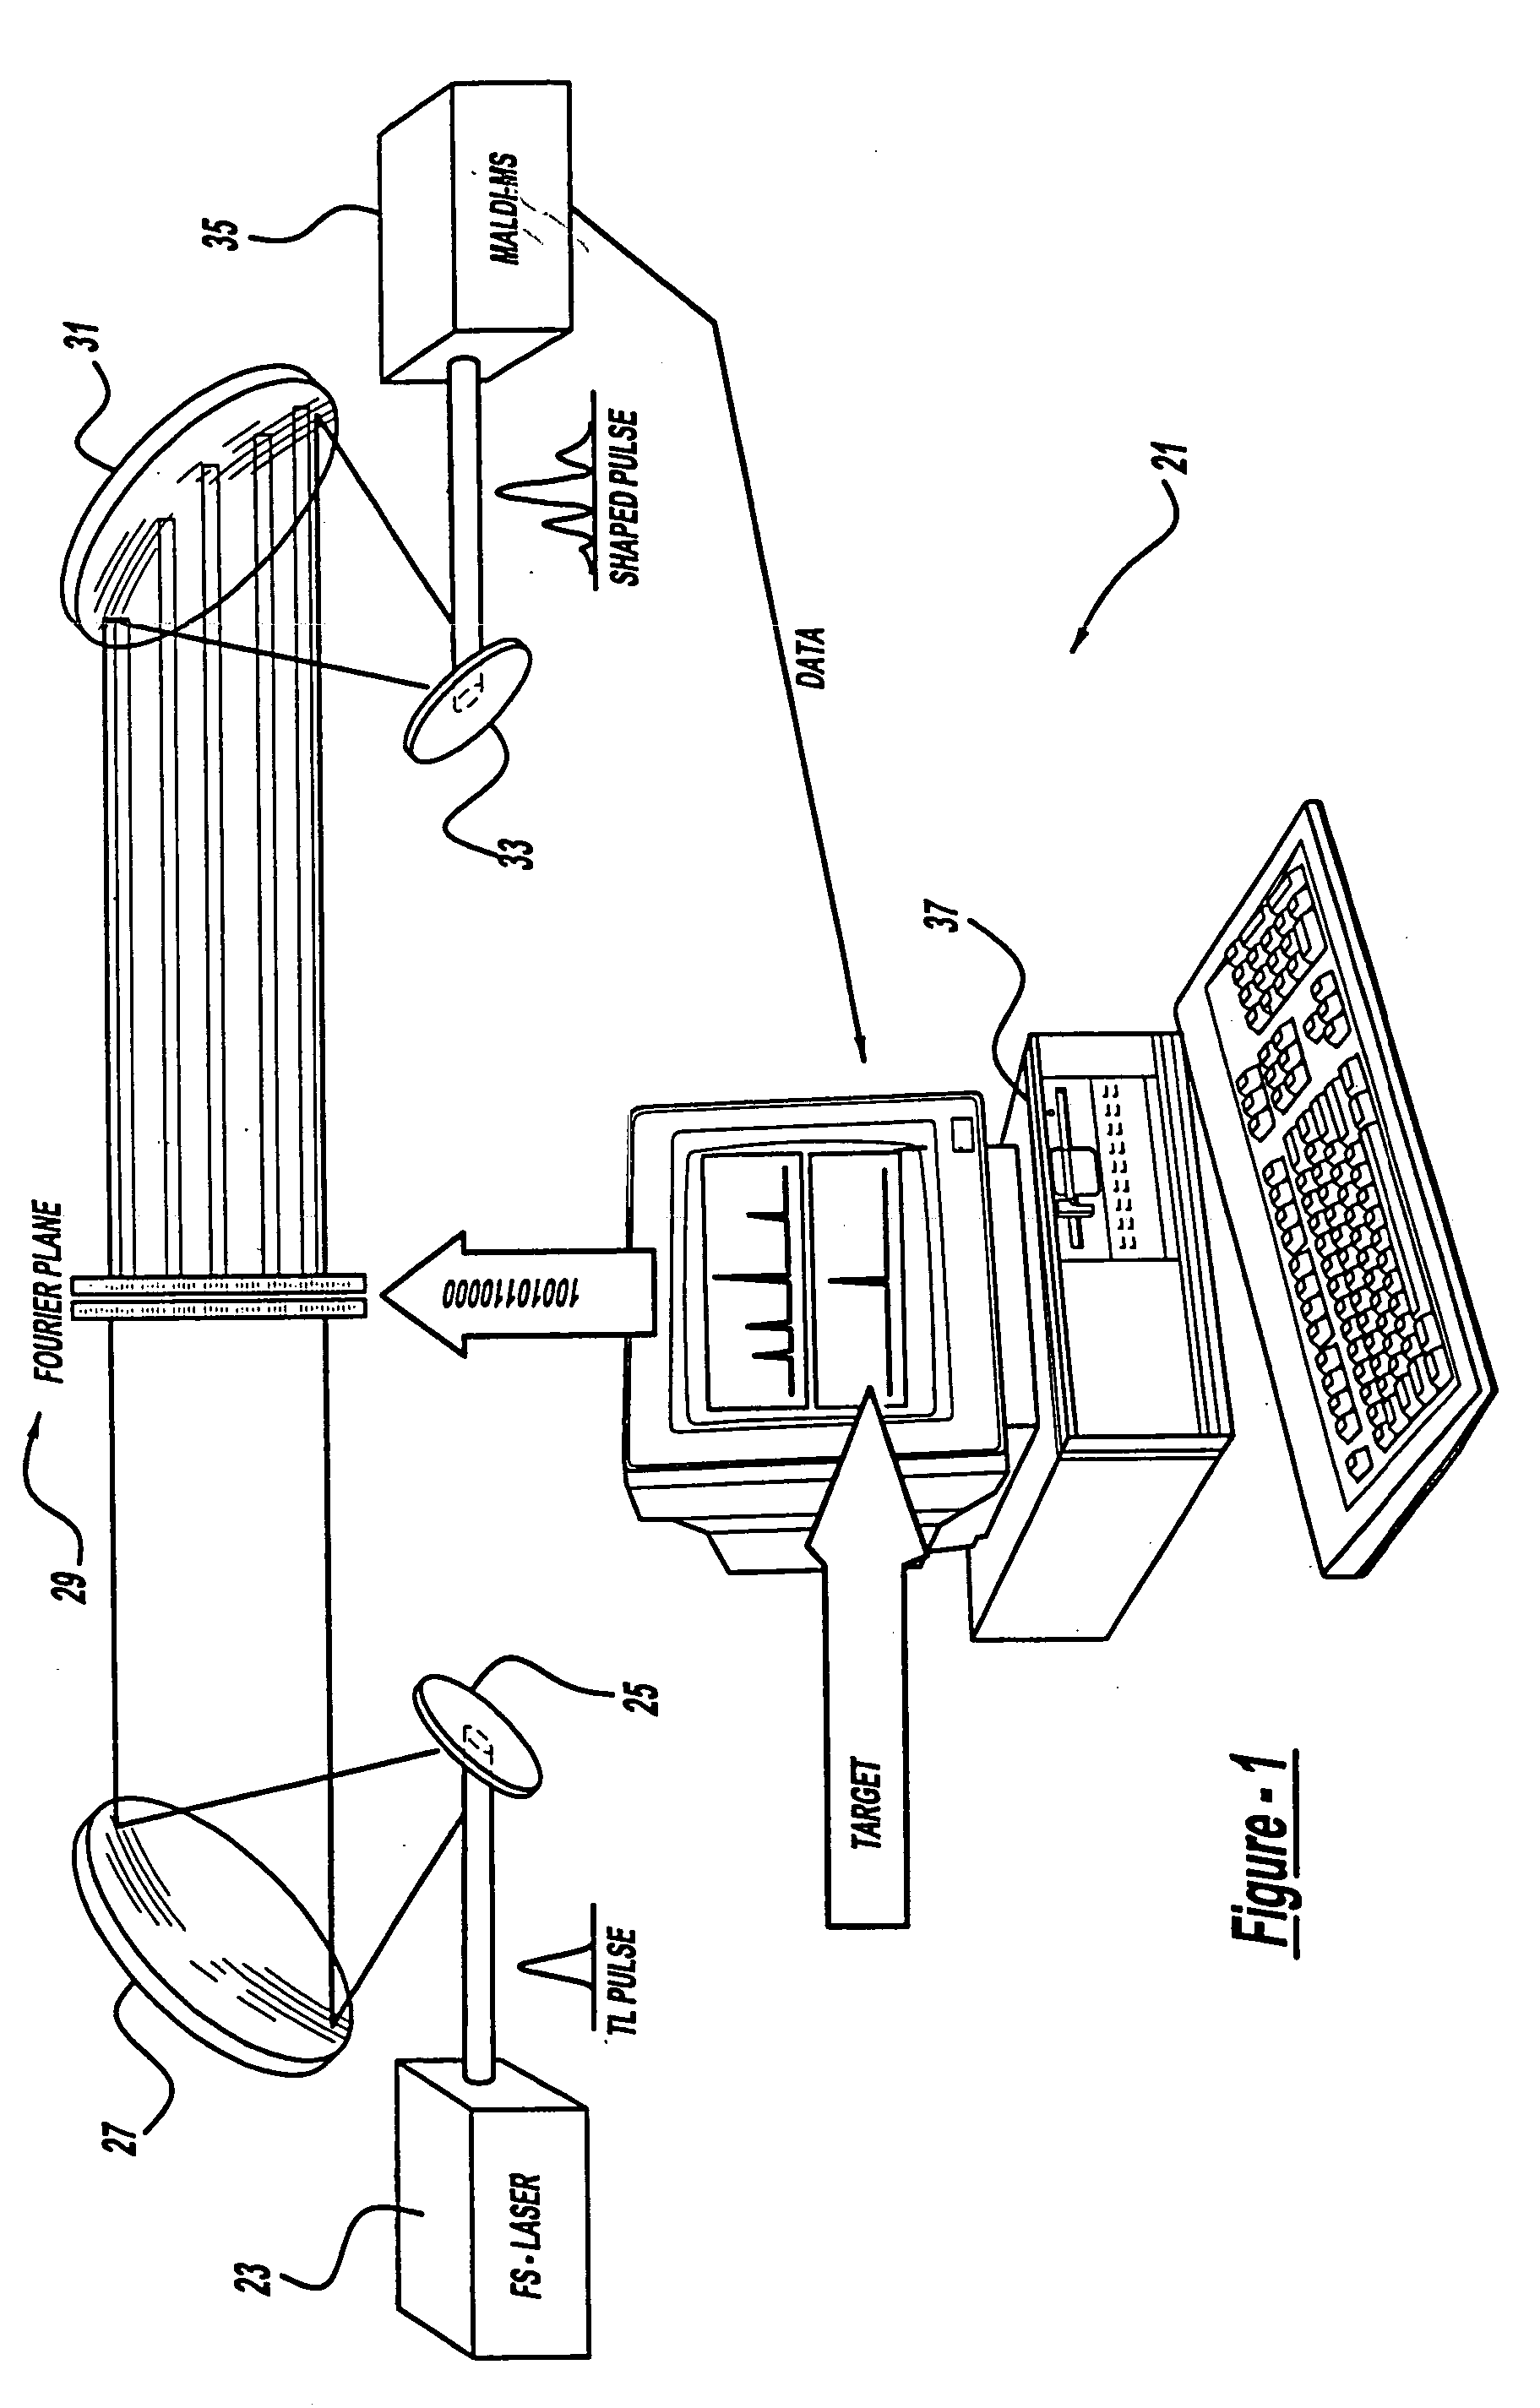 Control system and apparatus for use with laser excitation and ionization